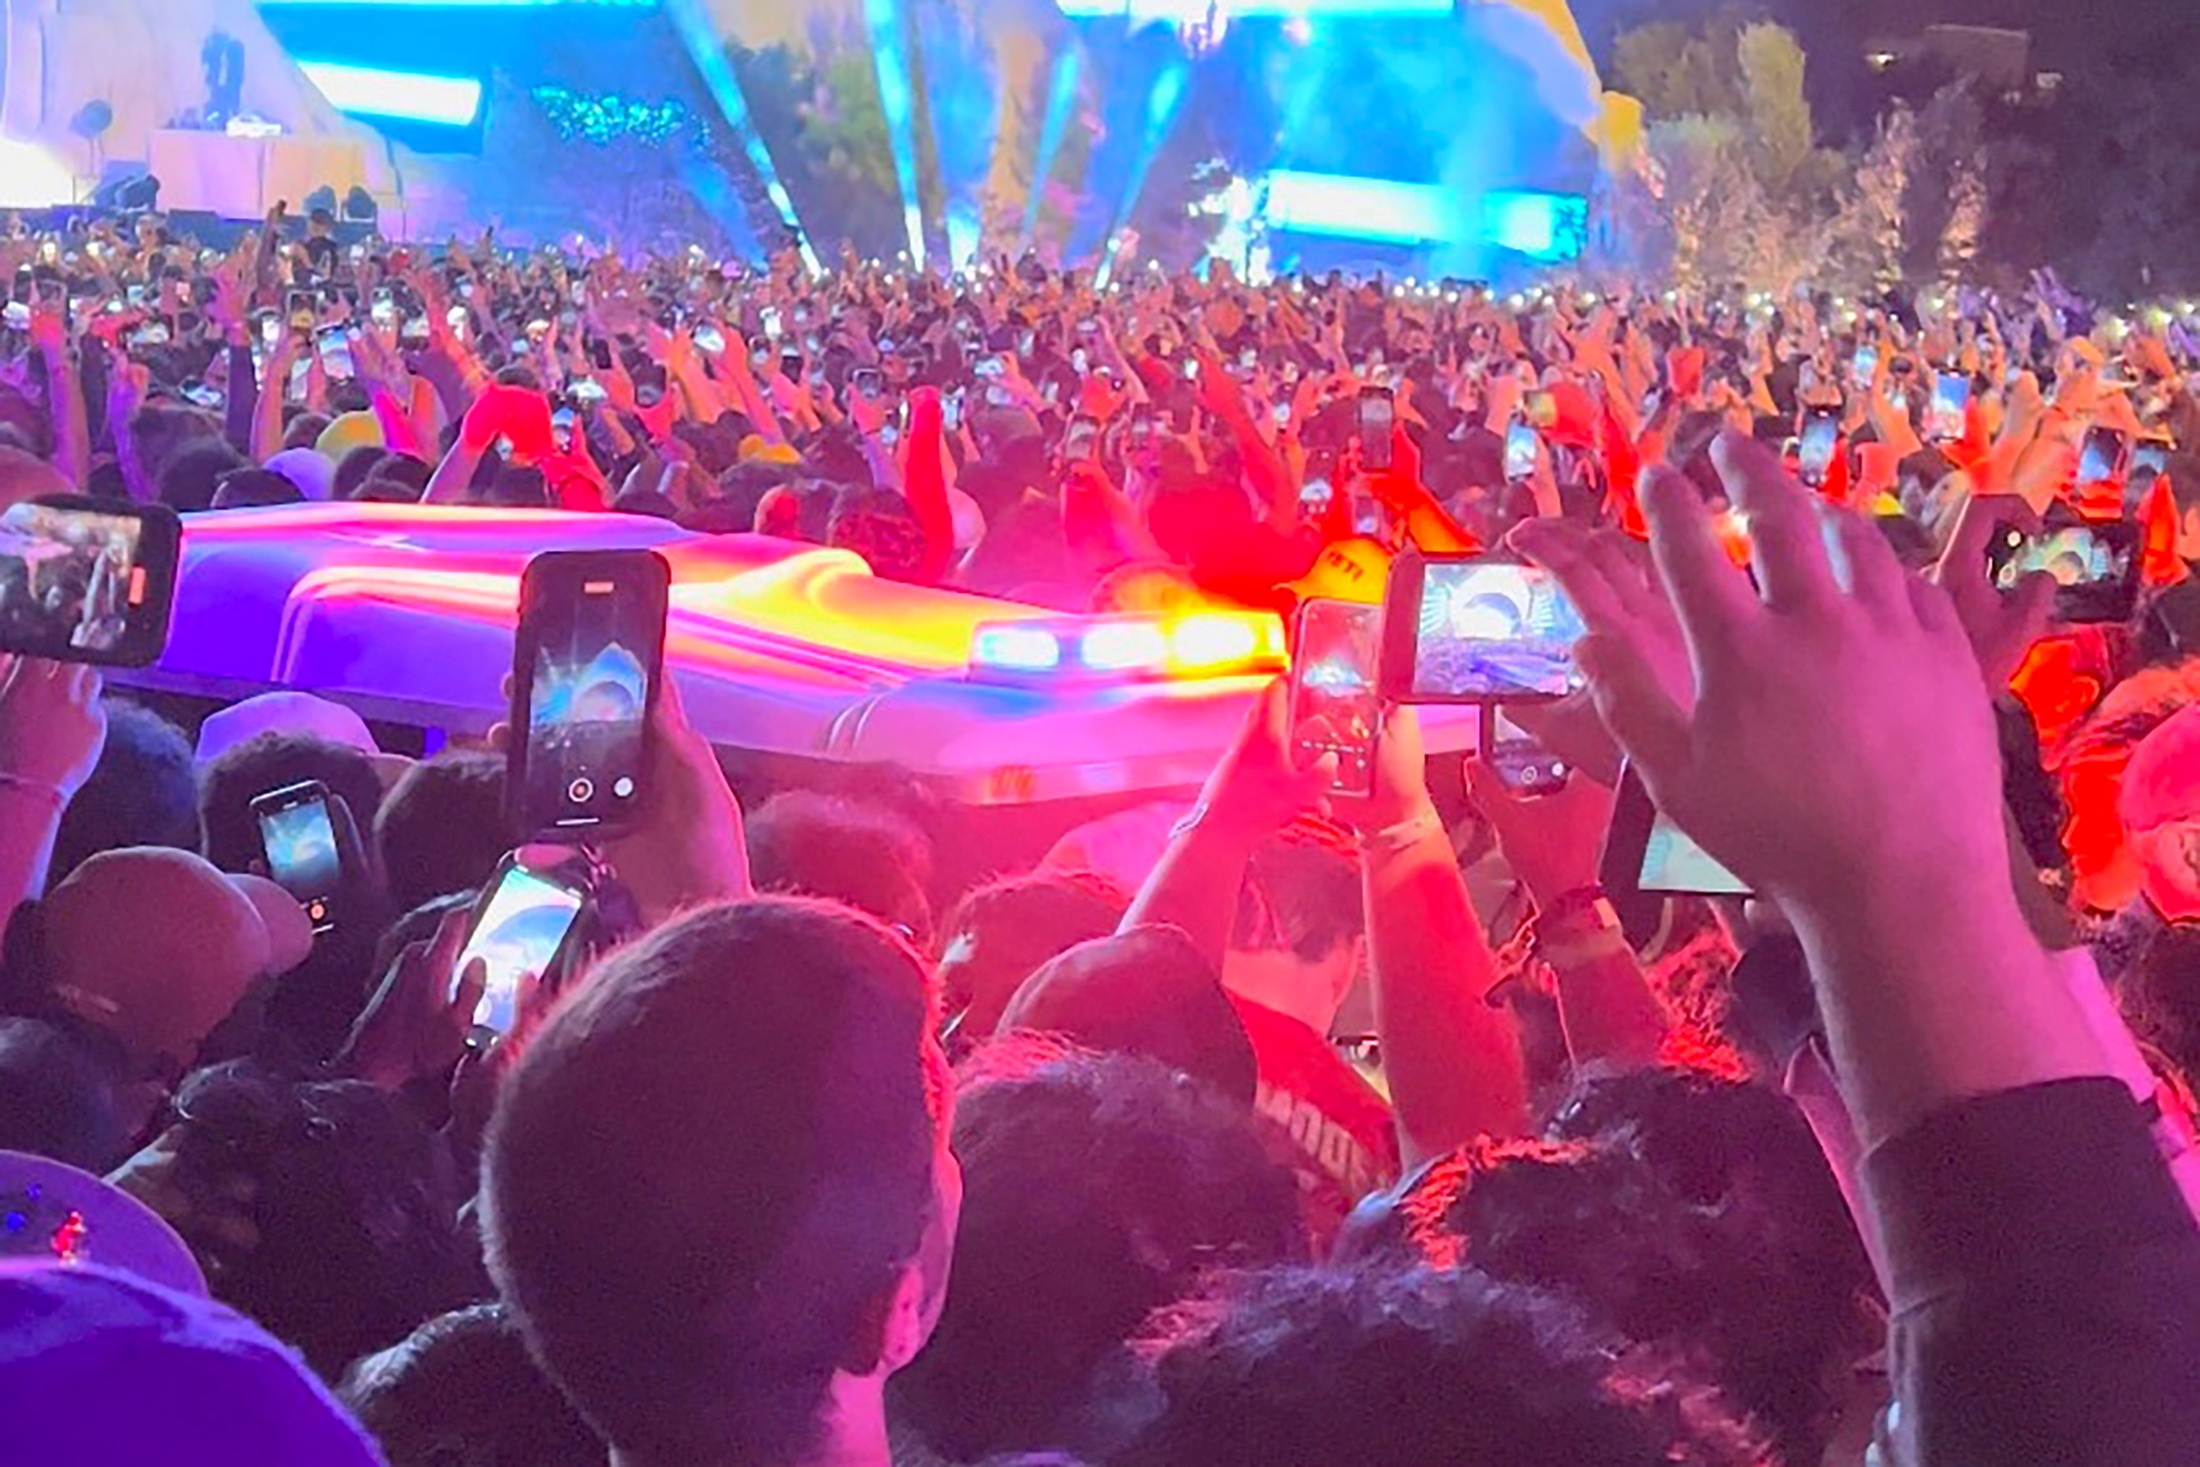 An ambulance is seen in the crowd during the Astroworld music festiwal in Houston, Texas, U.S., November 5, 2021 in this still image obtained from a social media video on November 6, 2021. Courtesy of Twitter @ONACASELLA /via REUTERS 